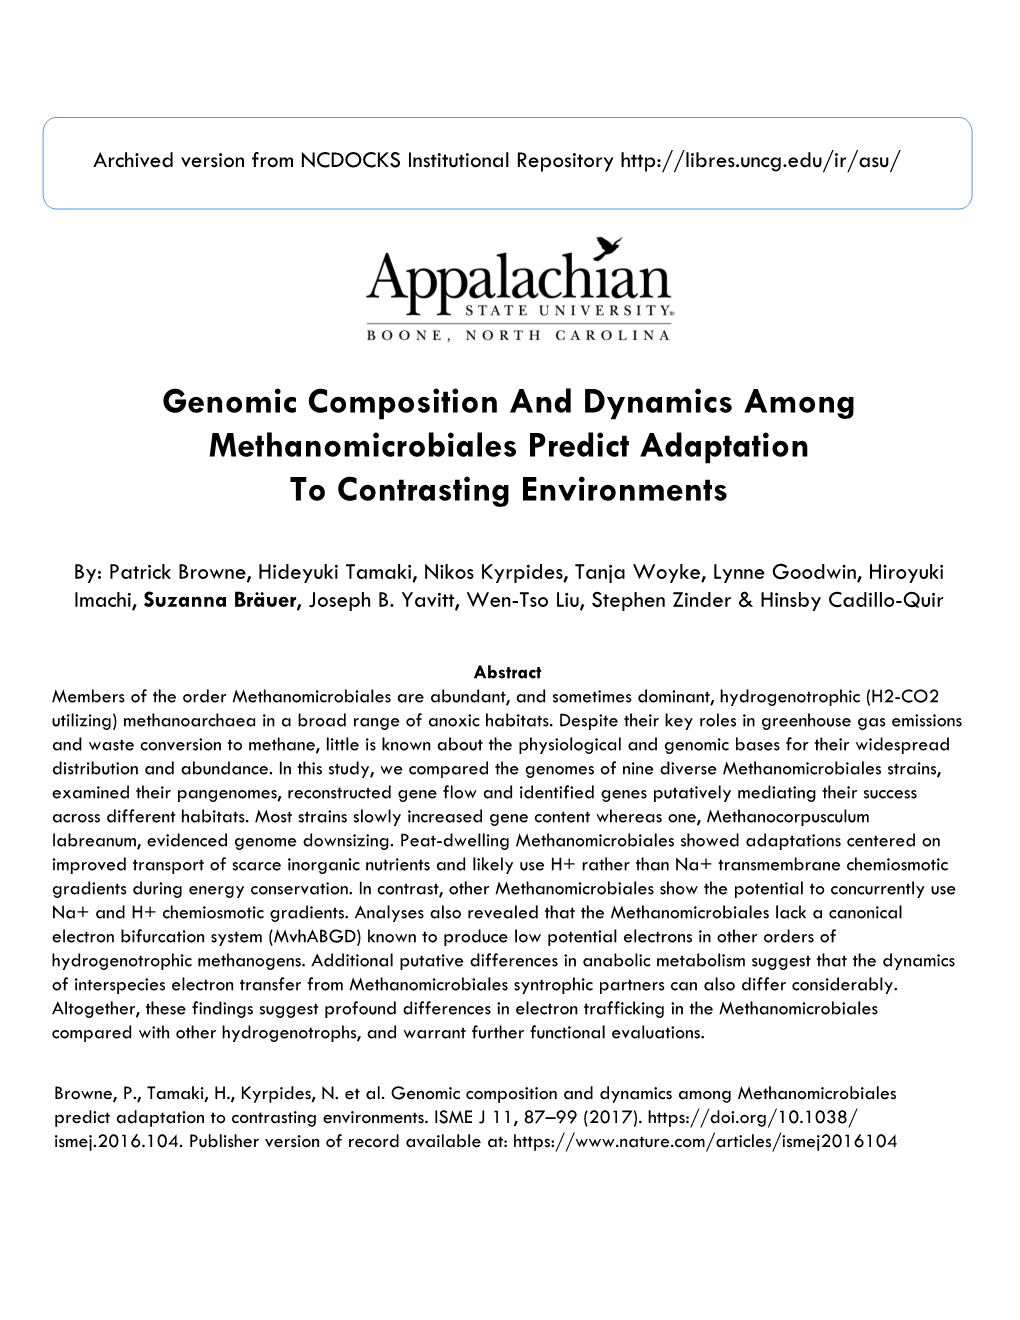 Genomic Composition and Dynamics Among Methanomicrobiales Predict Adaptation to Contrasting Environments